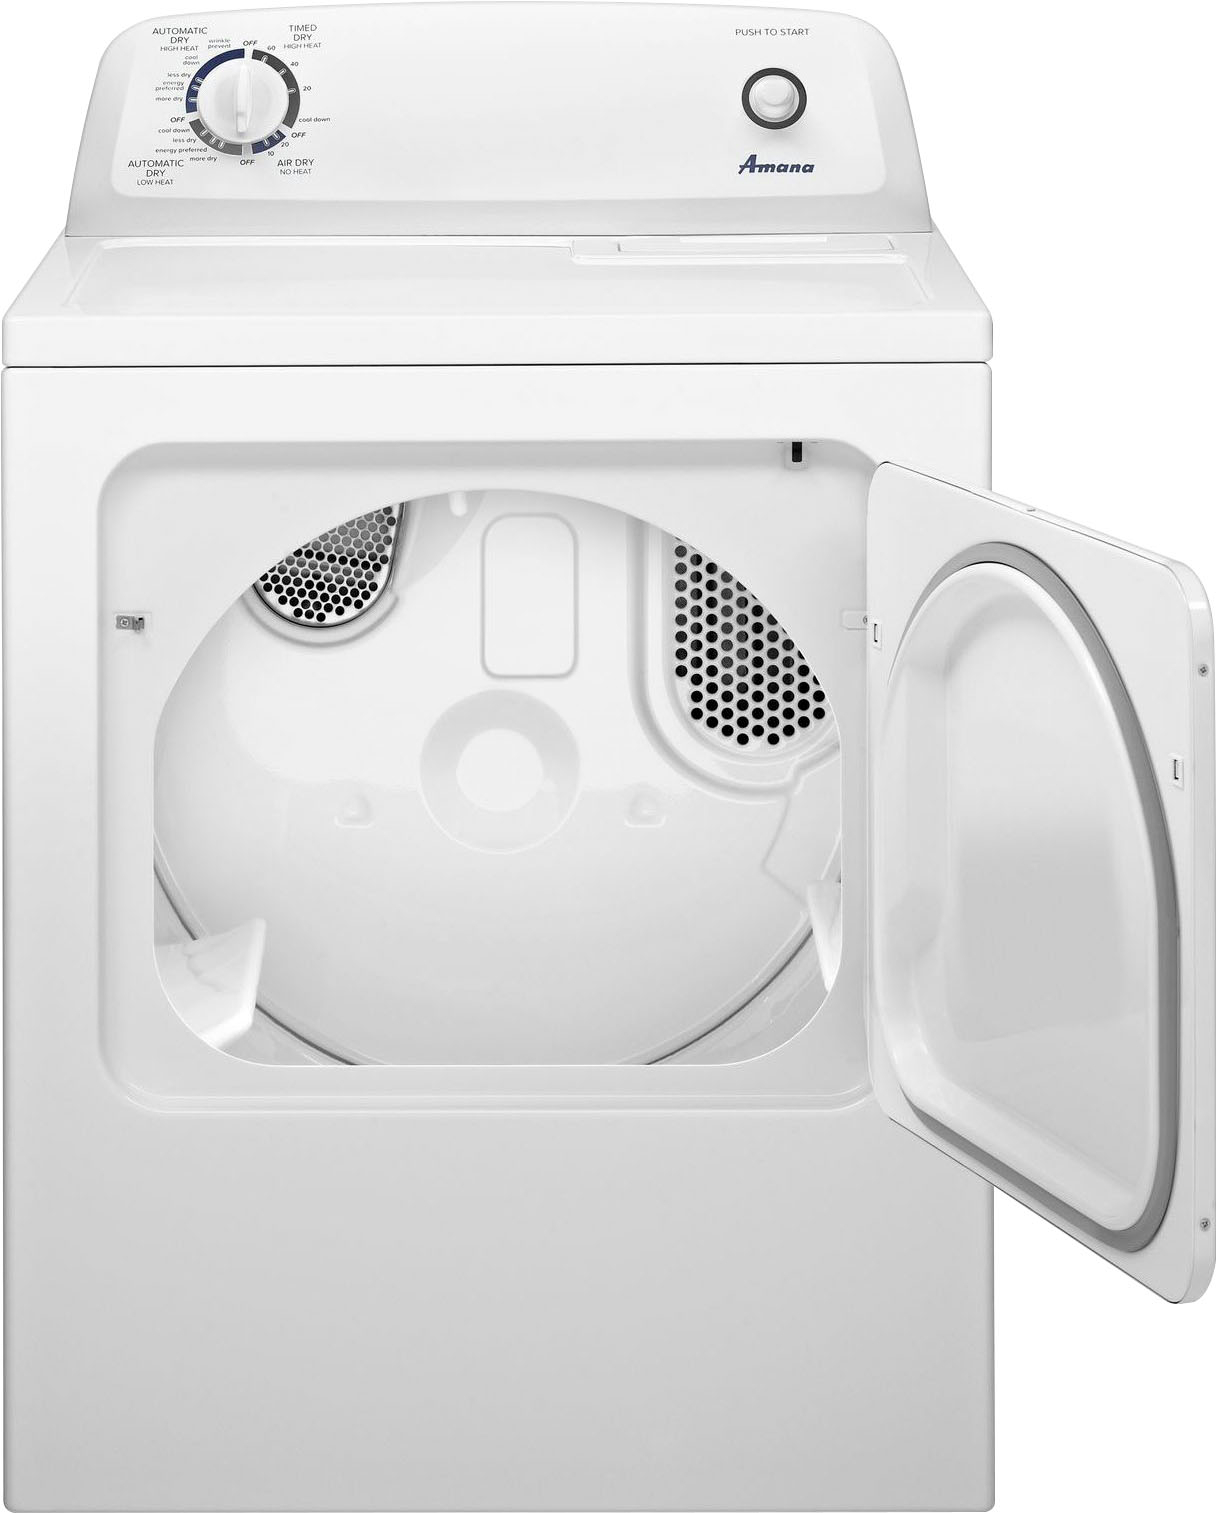 Angle View: Samsung - 7.4 Cu. Ft. Smart Electric Dryer with Steam Sanitize+ - Champagne